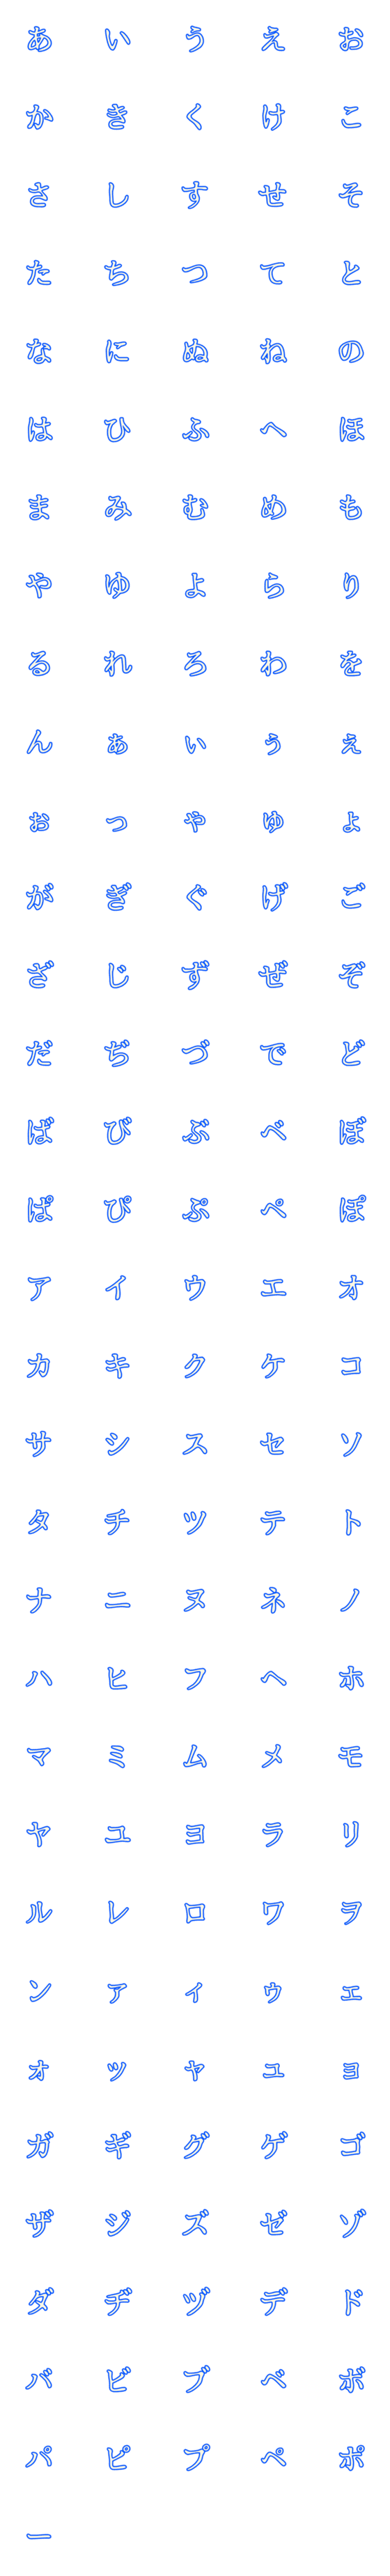 [LINE絵文字]怖いフォントの絵文字の画像一覧